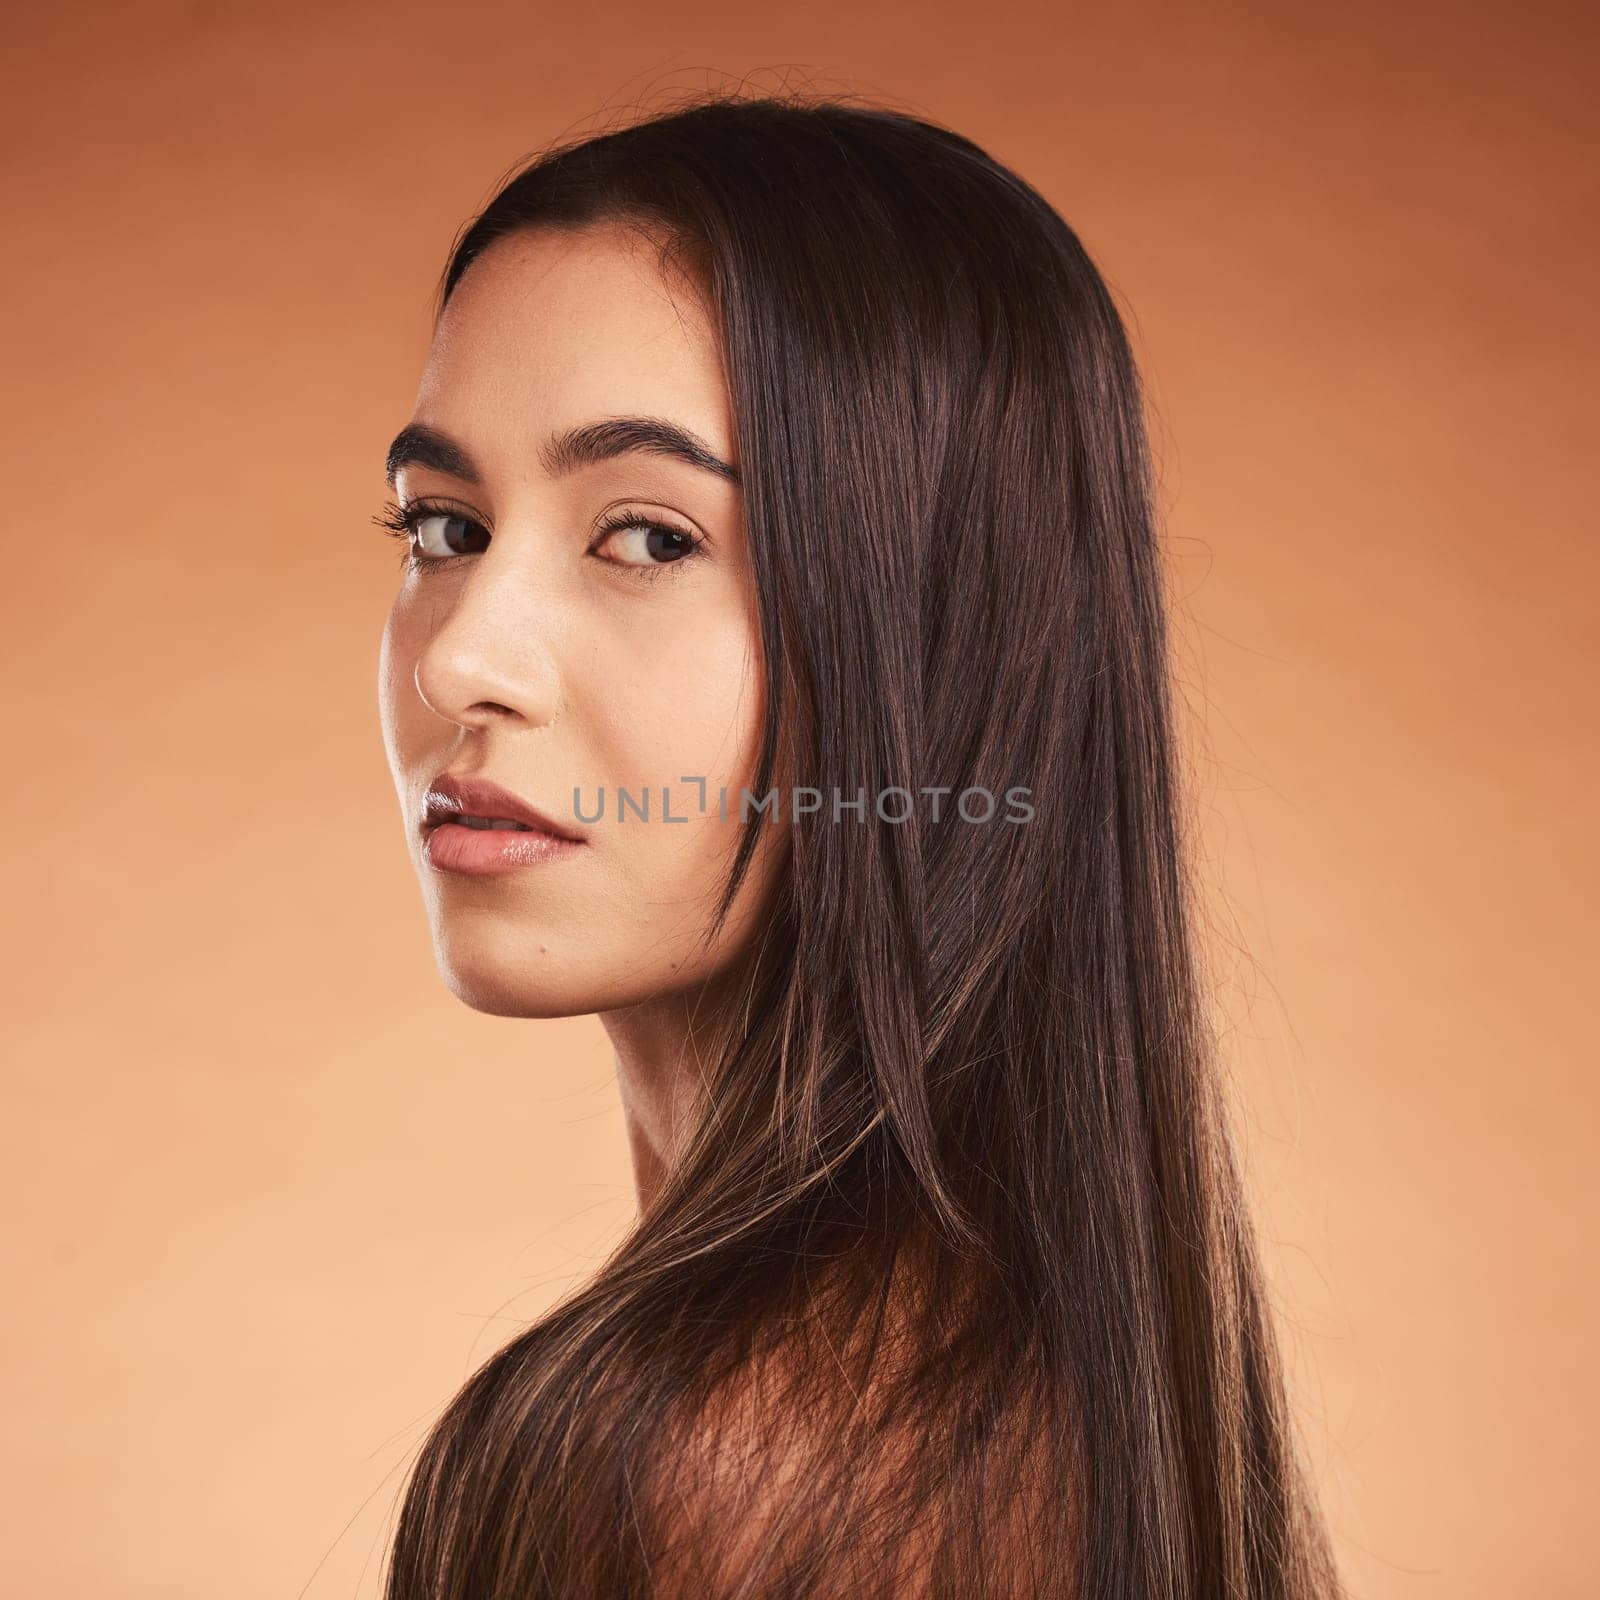 Hair care, beauty and face portrait of woman on brown studio background. Luxury makeup, skincare and female model with beautiful, healthy and long hair after salon hair treatment for clean hairstyle